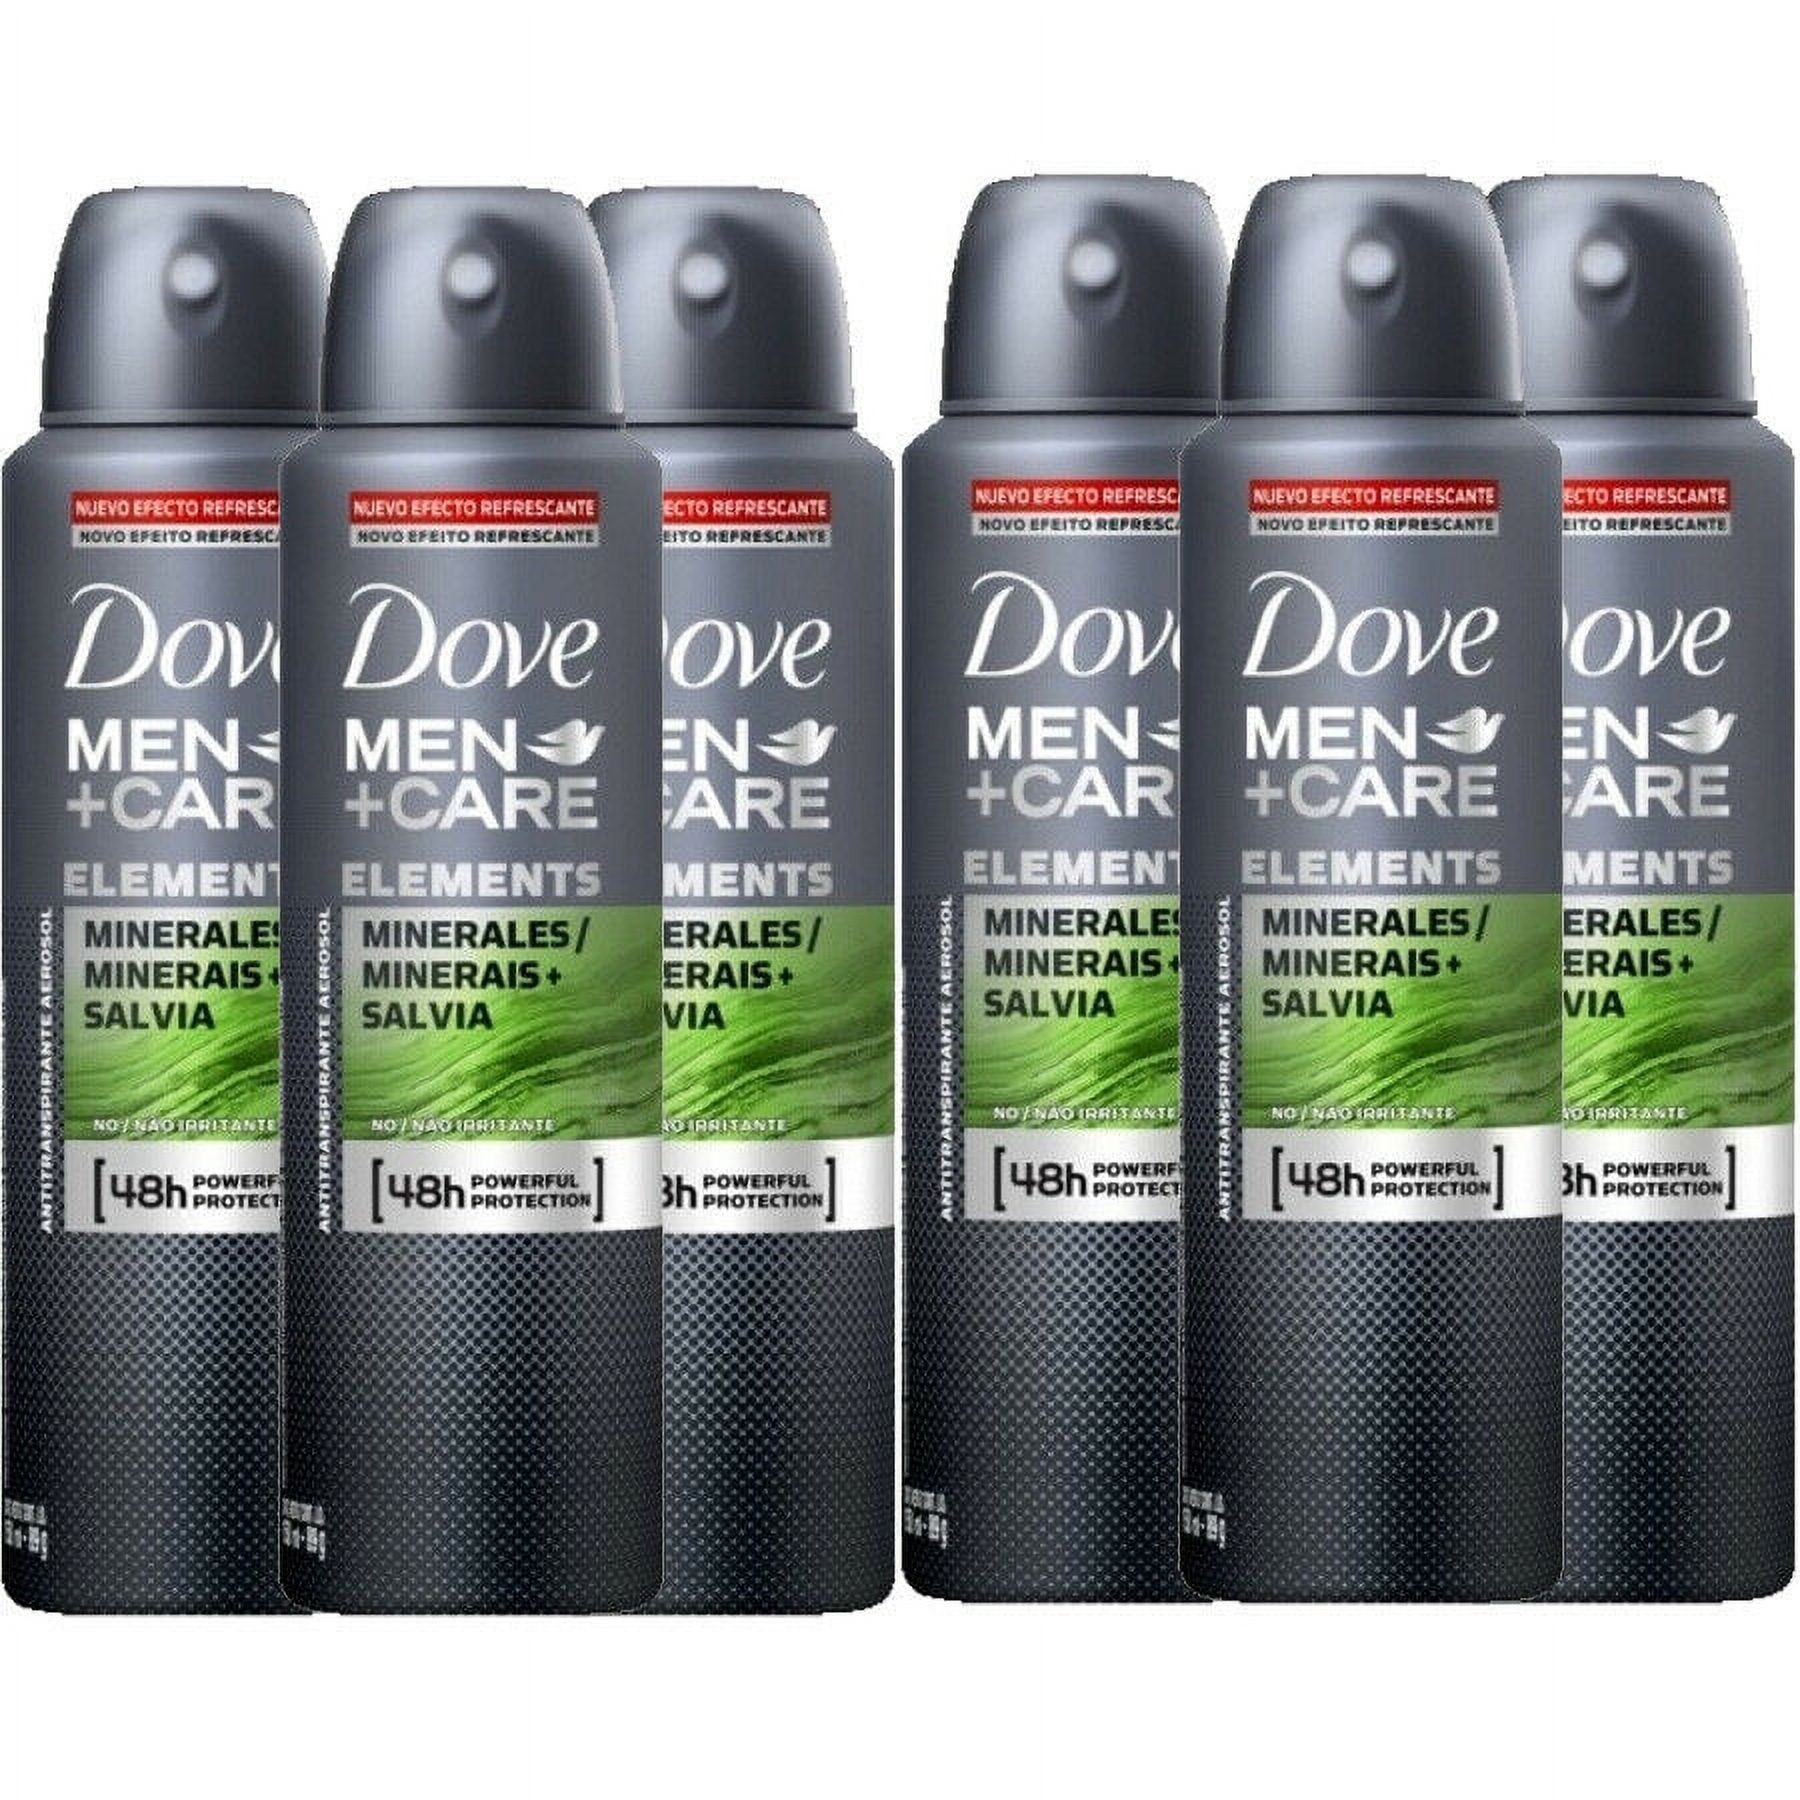 6 Pack Dove Mens+Care Elements Minerals + Sage Antiperspirant Deo Spray 150ml - image 1 of 2